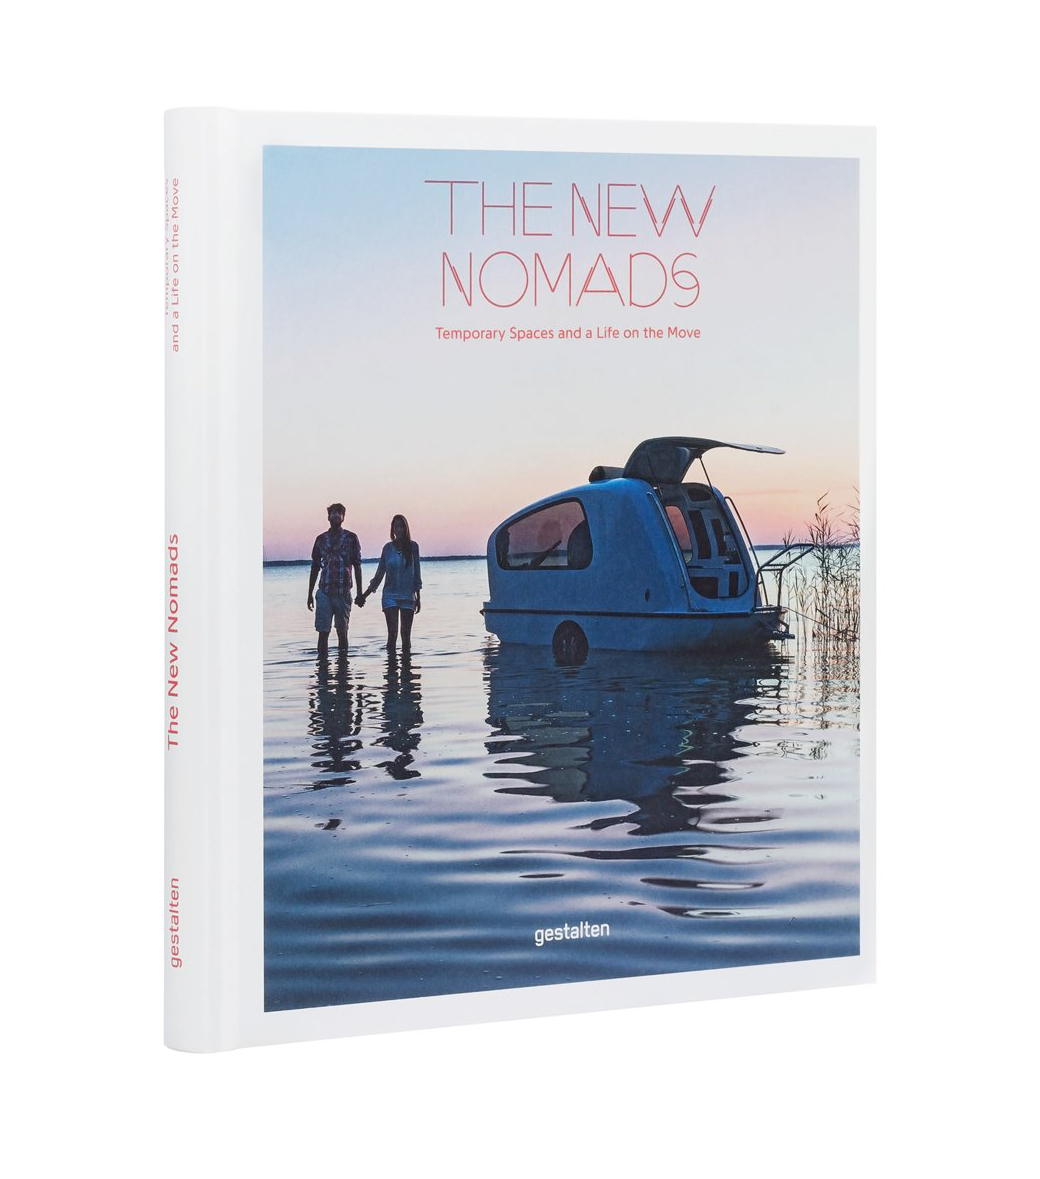  - The New Nomads: Temporary Spaces and a Life on the Move